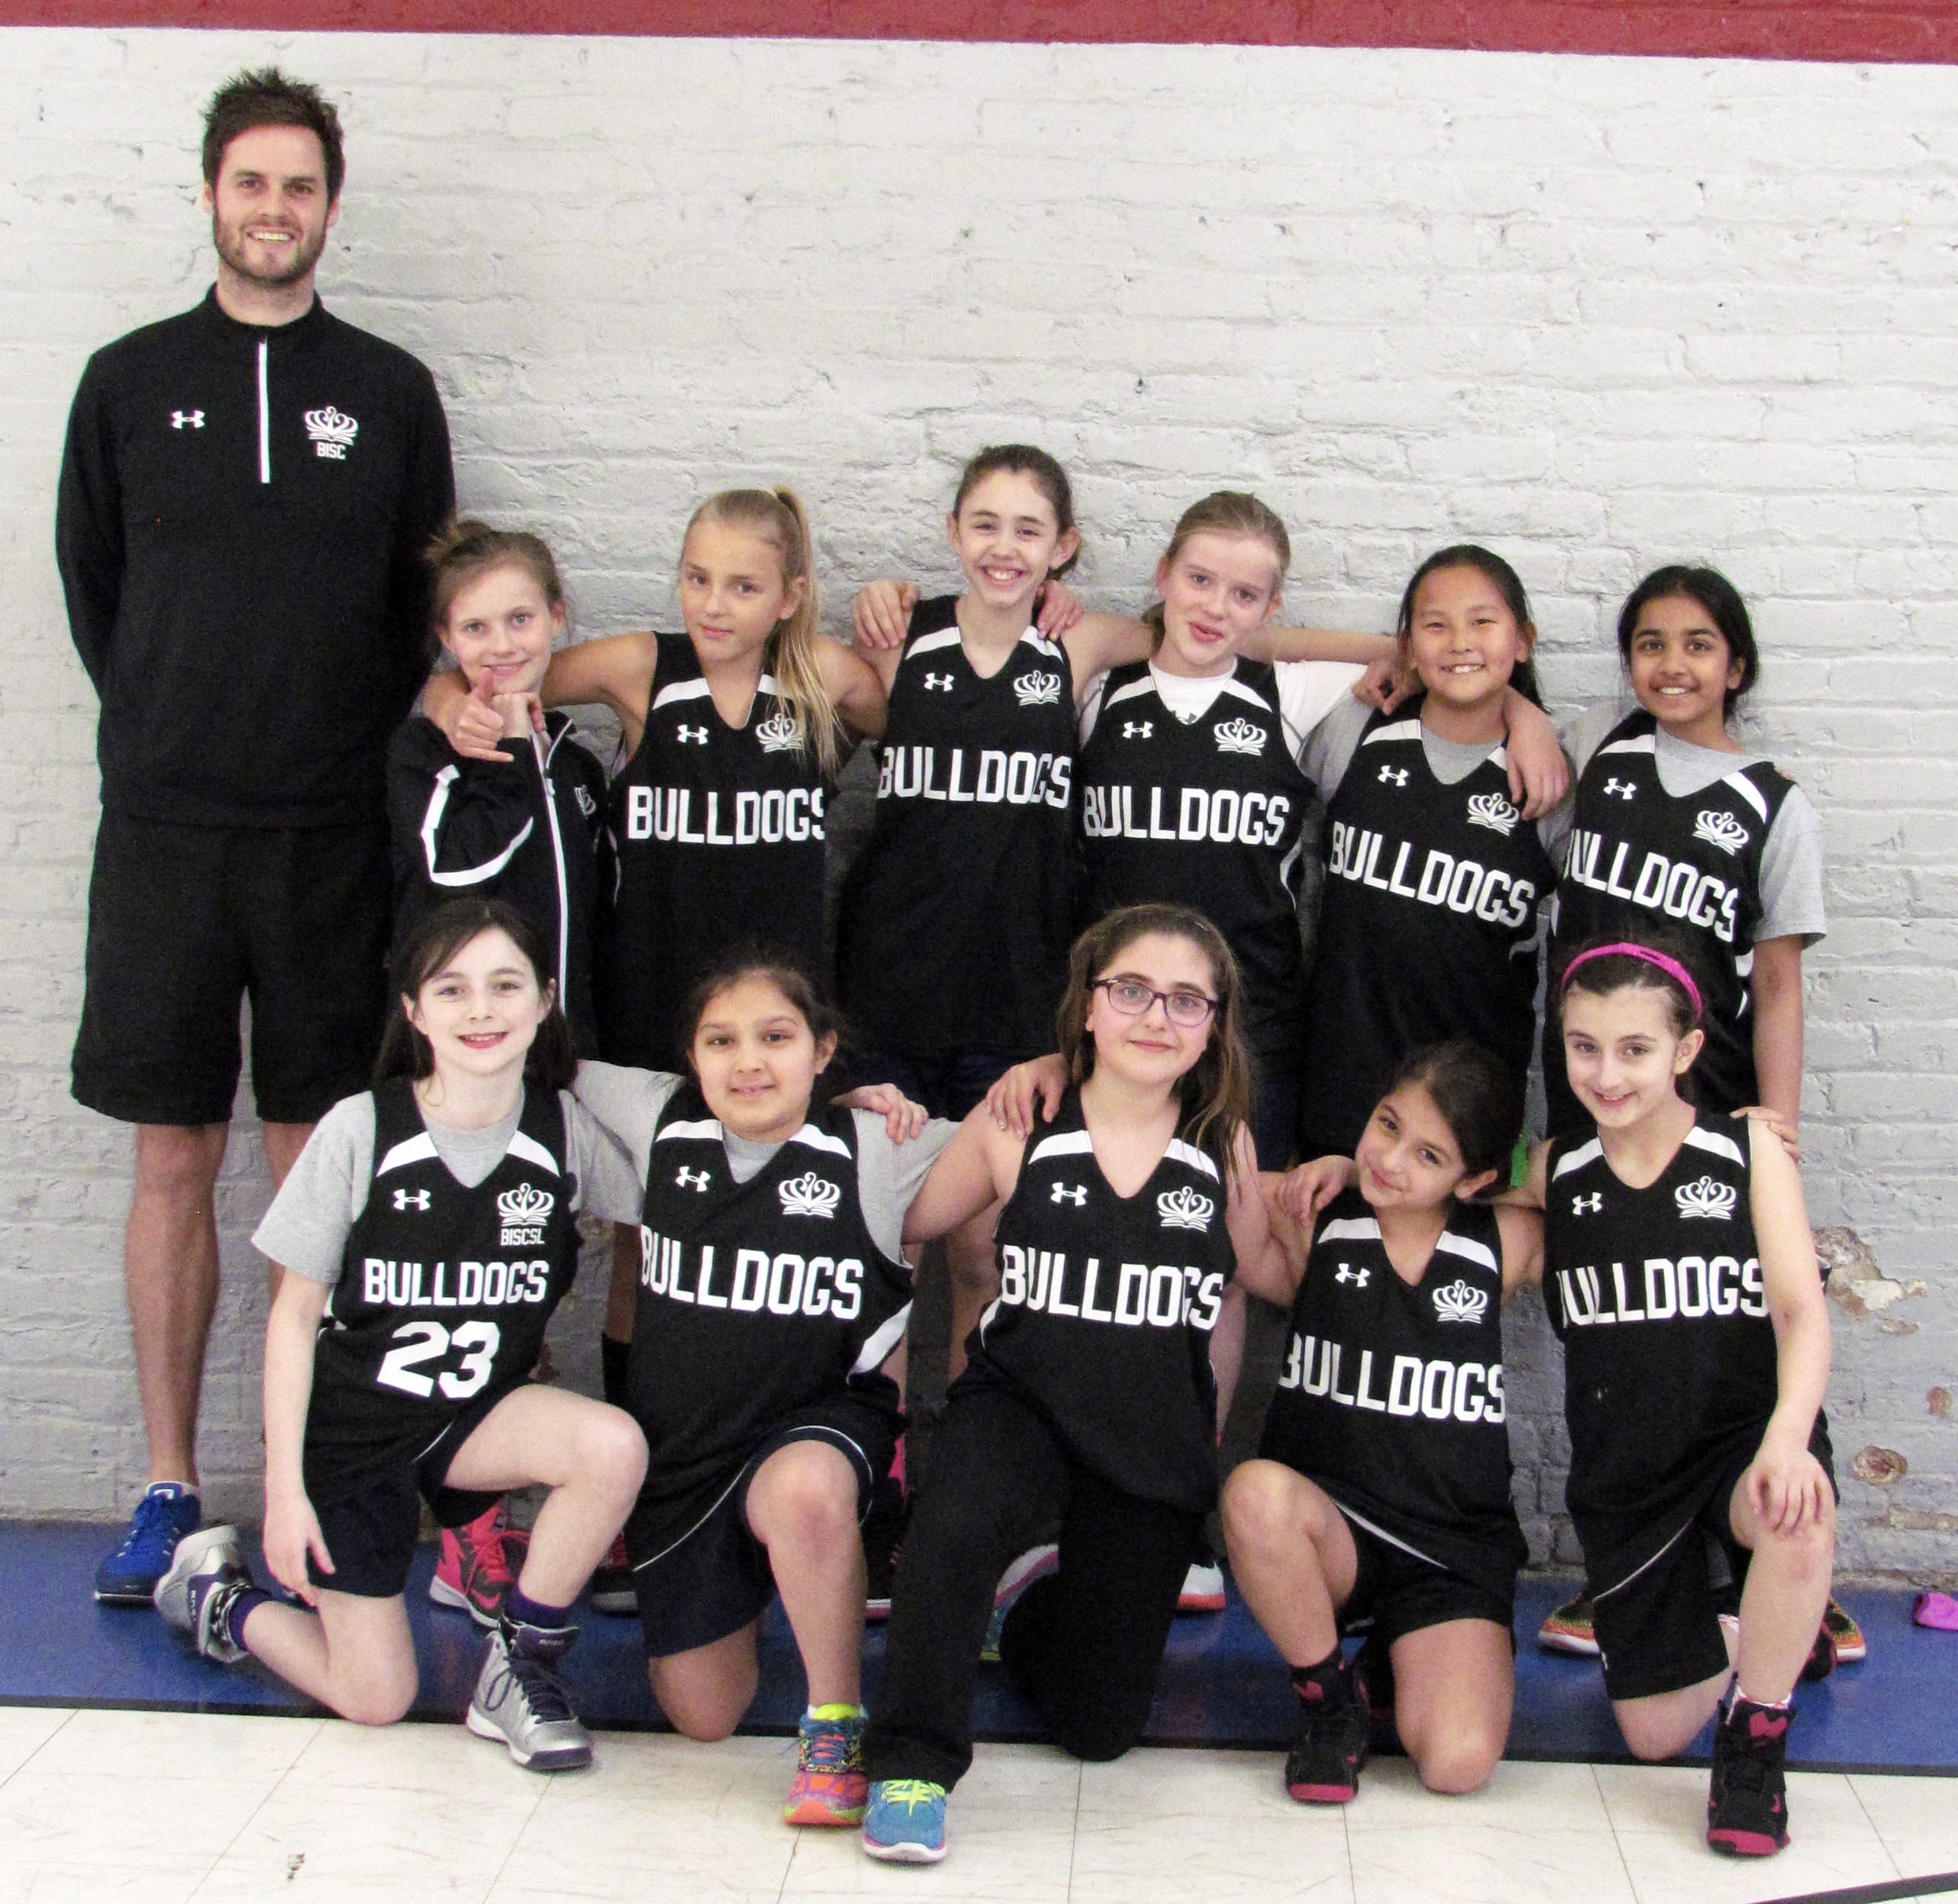 Primary Basketball Teams Take 2 Wins with 1 Week to Go - primary-basketball-teams-take-2-wins-with-1-week-to-go